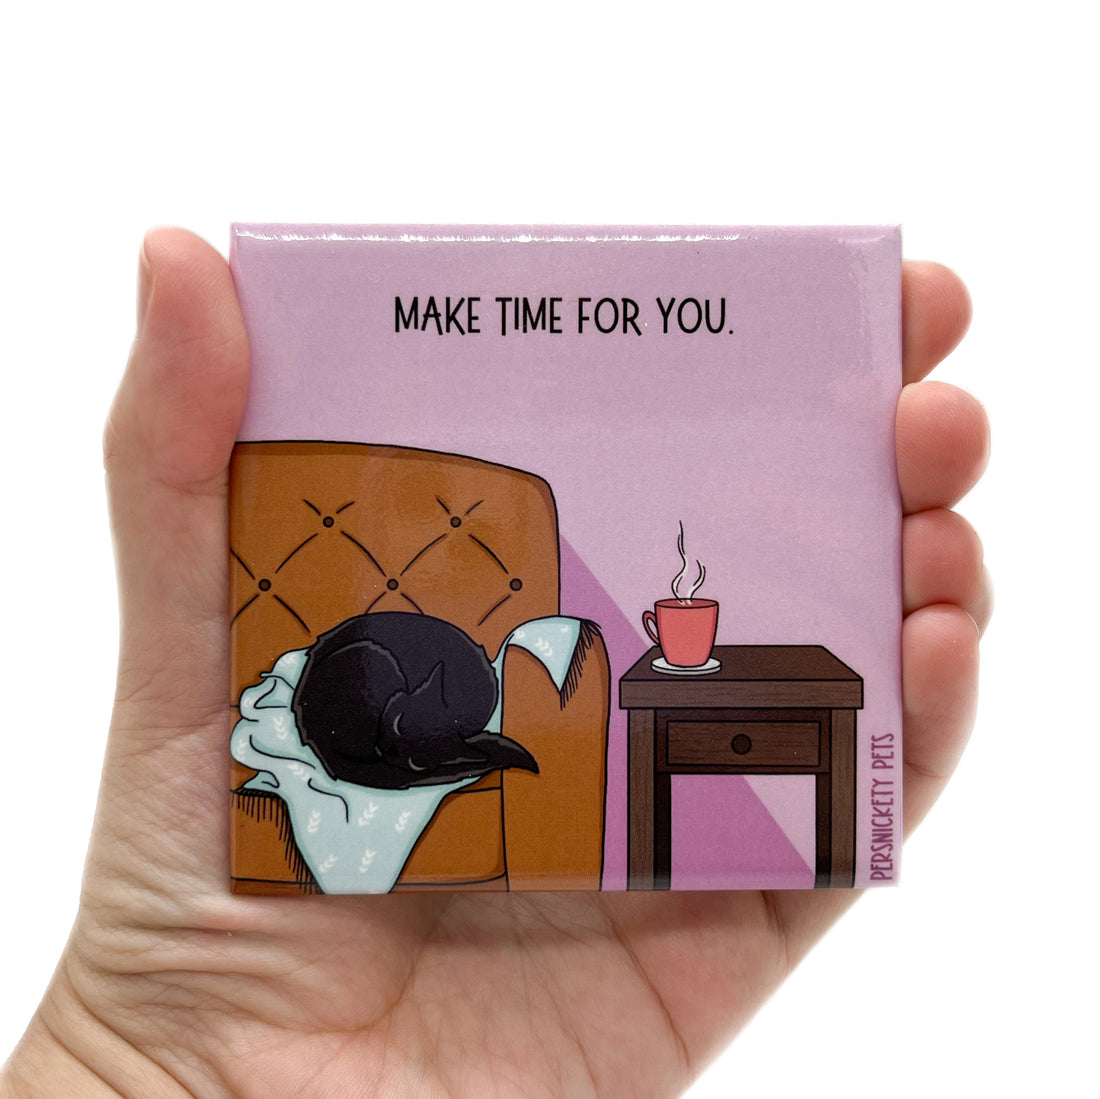 Persnickety Pets: Make Time for You fridge magnet in hand